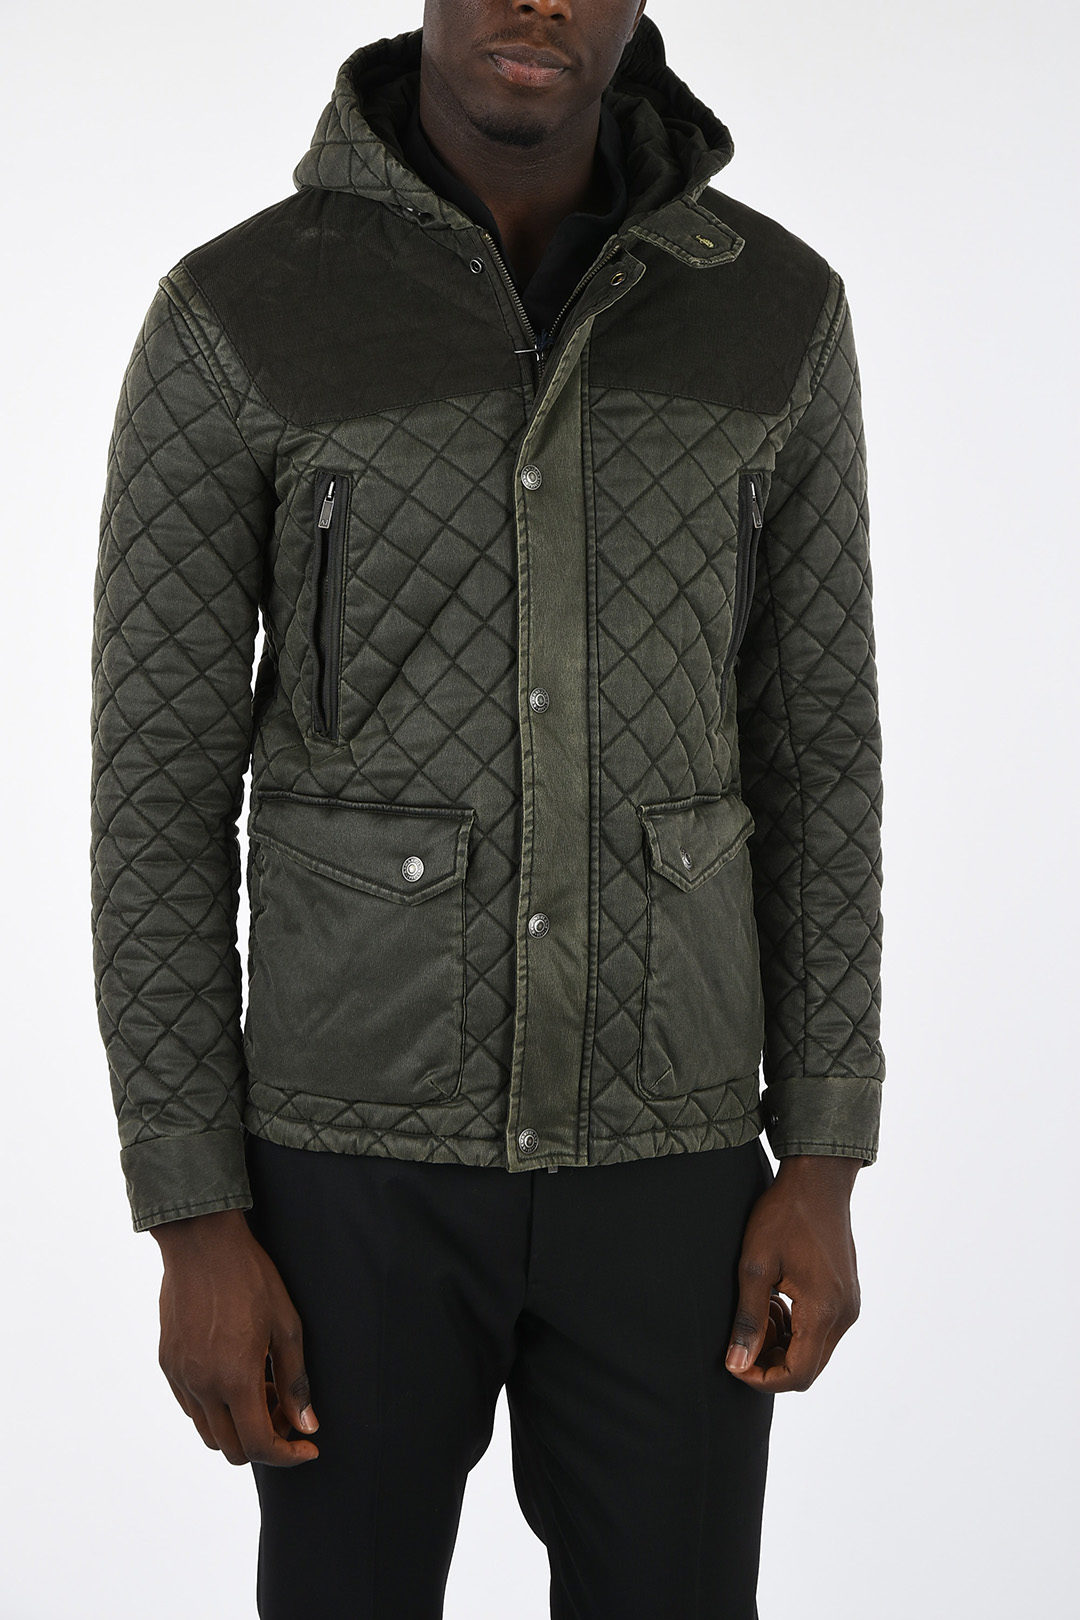 Armani ARMANI JEANS hooded quilted jacket men - Glamood Outlet